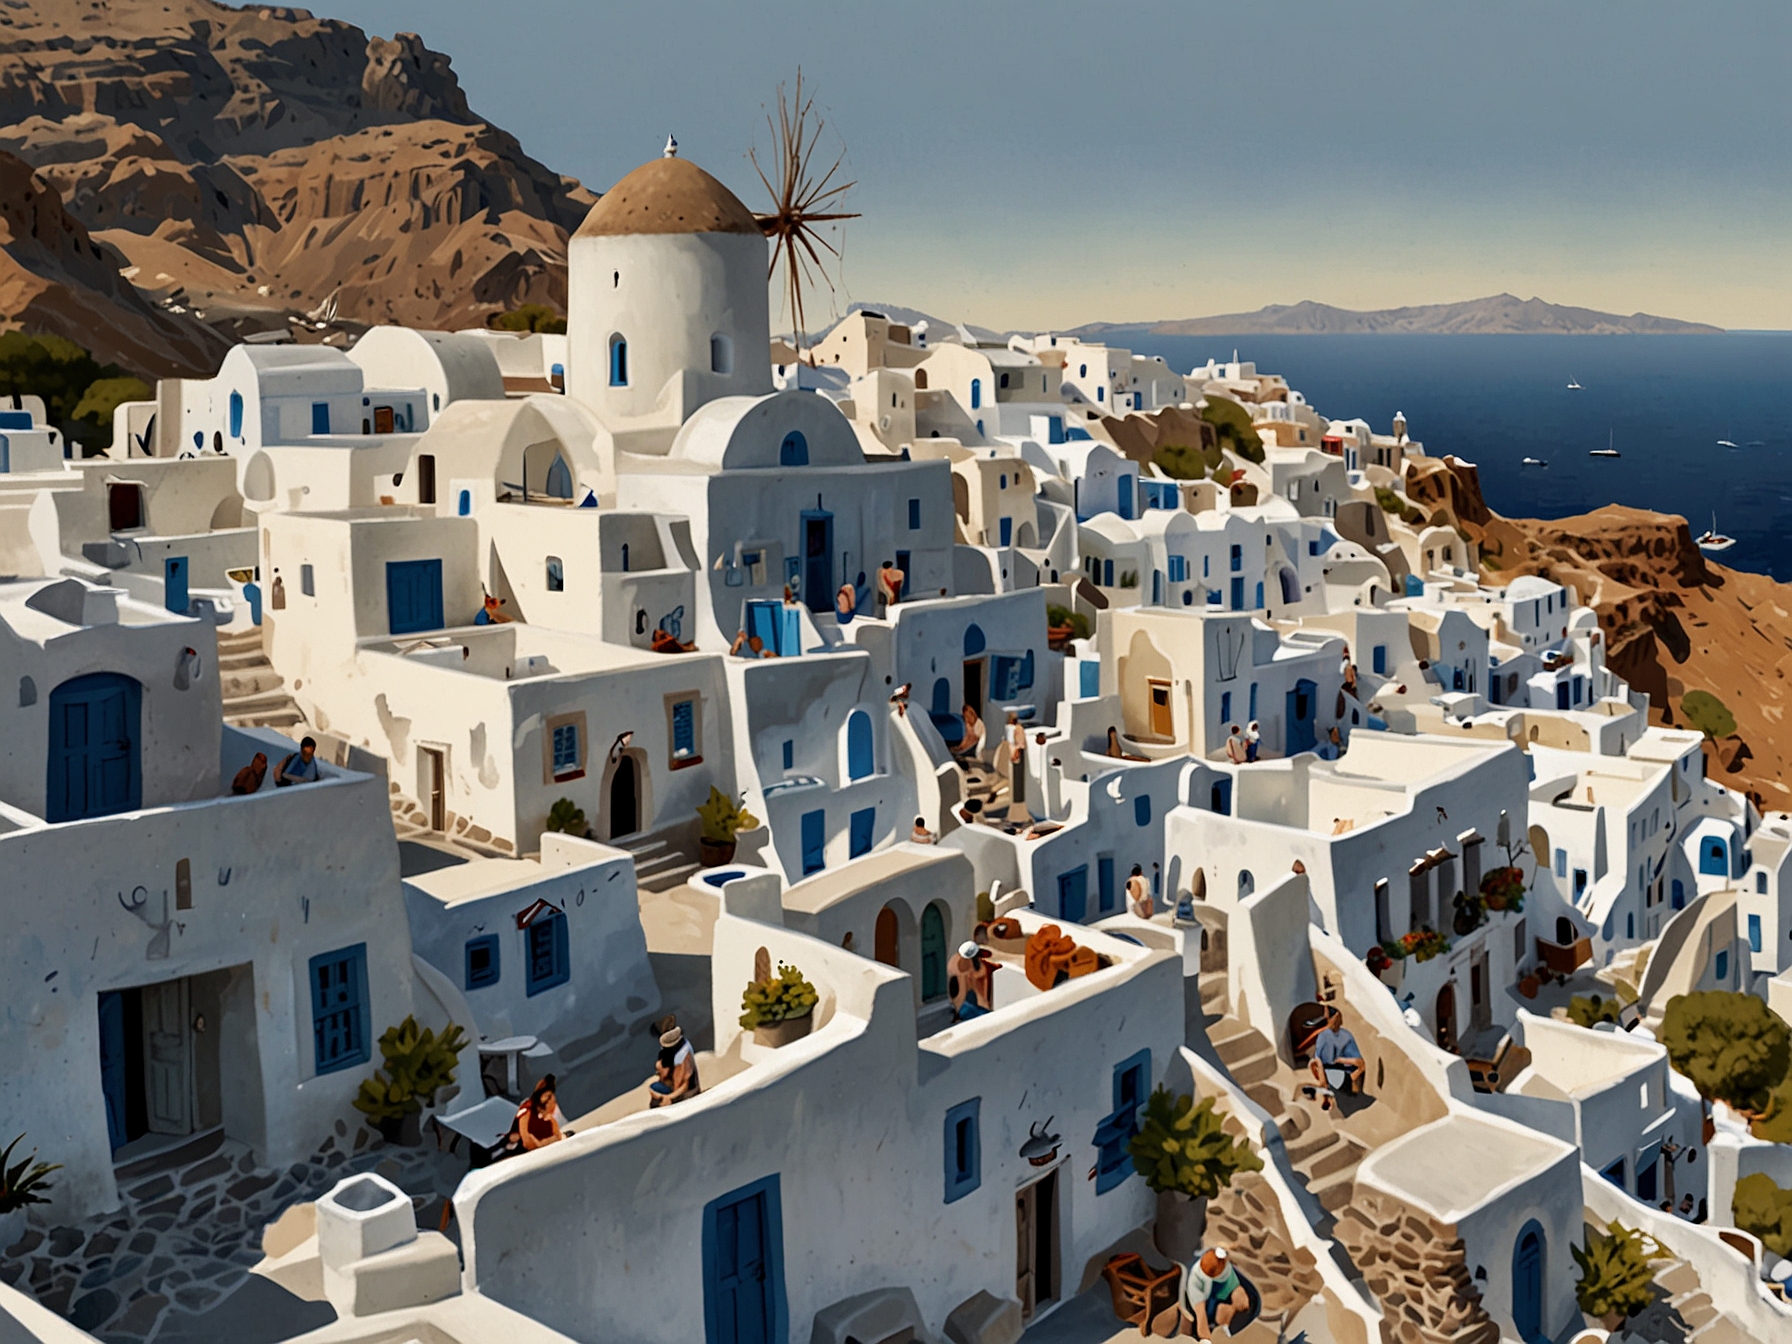 An aerial view of Santorini, showcasing its iconic white-washed buildings and congested streets filled with tourists. The image highlights the overcrowding and the strain on local infrastructure.